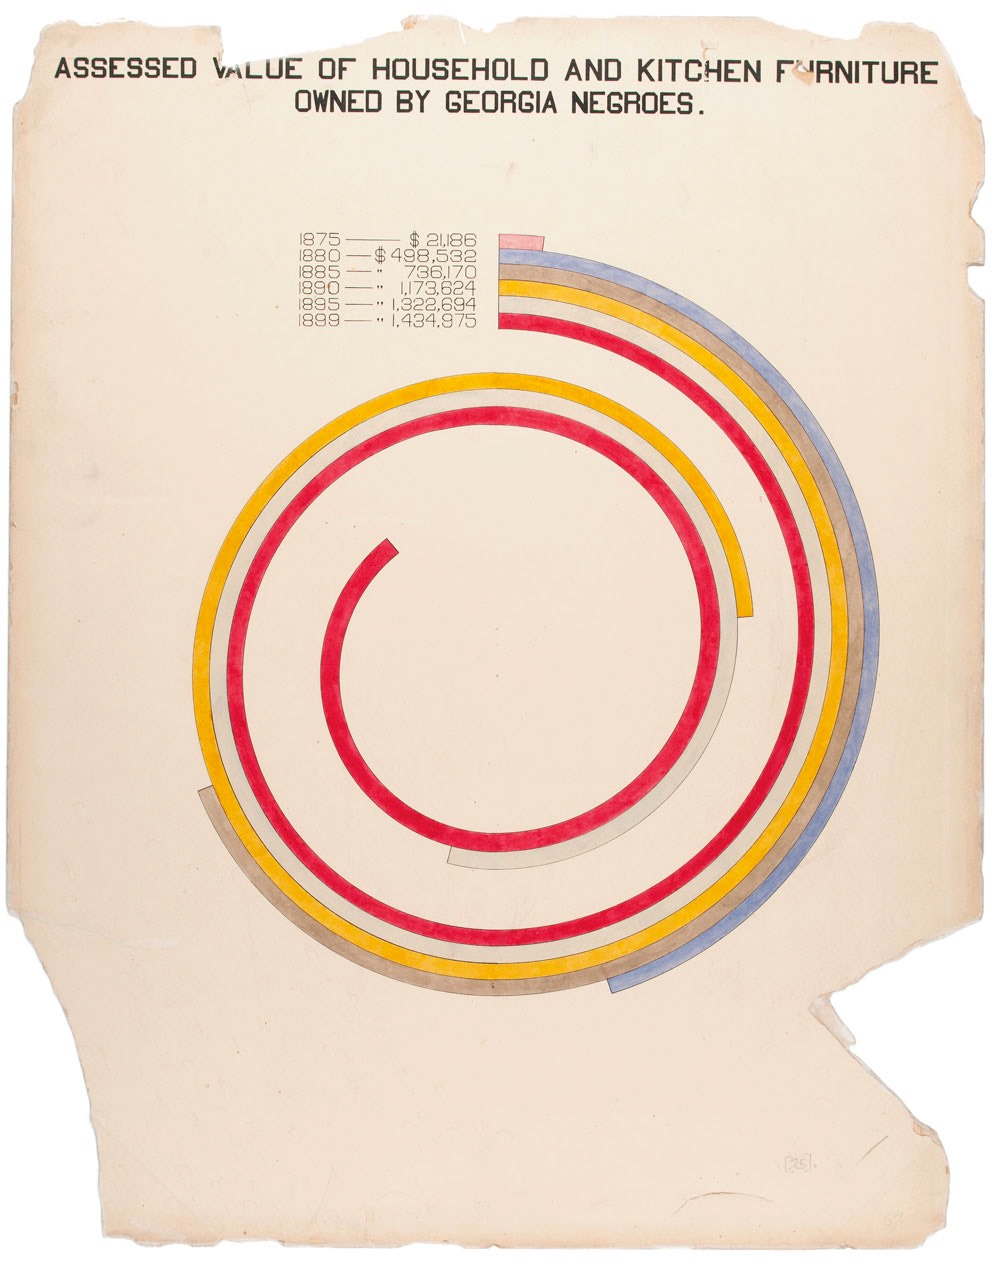 infographic designed by W.E.B. Du Bois titled 'Assessed value of household and kitchen furniture owned by Georgia negros'